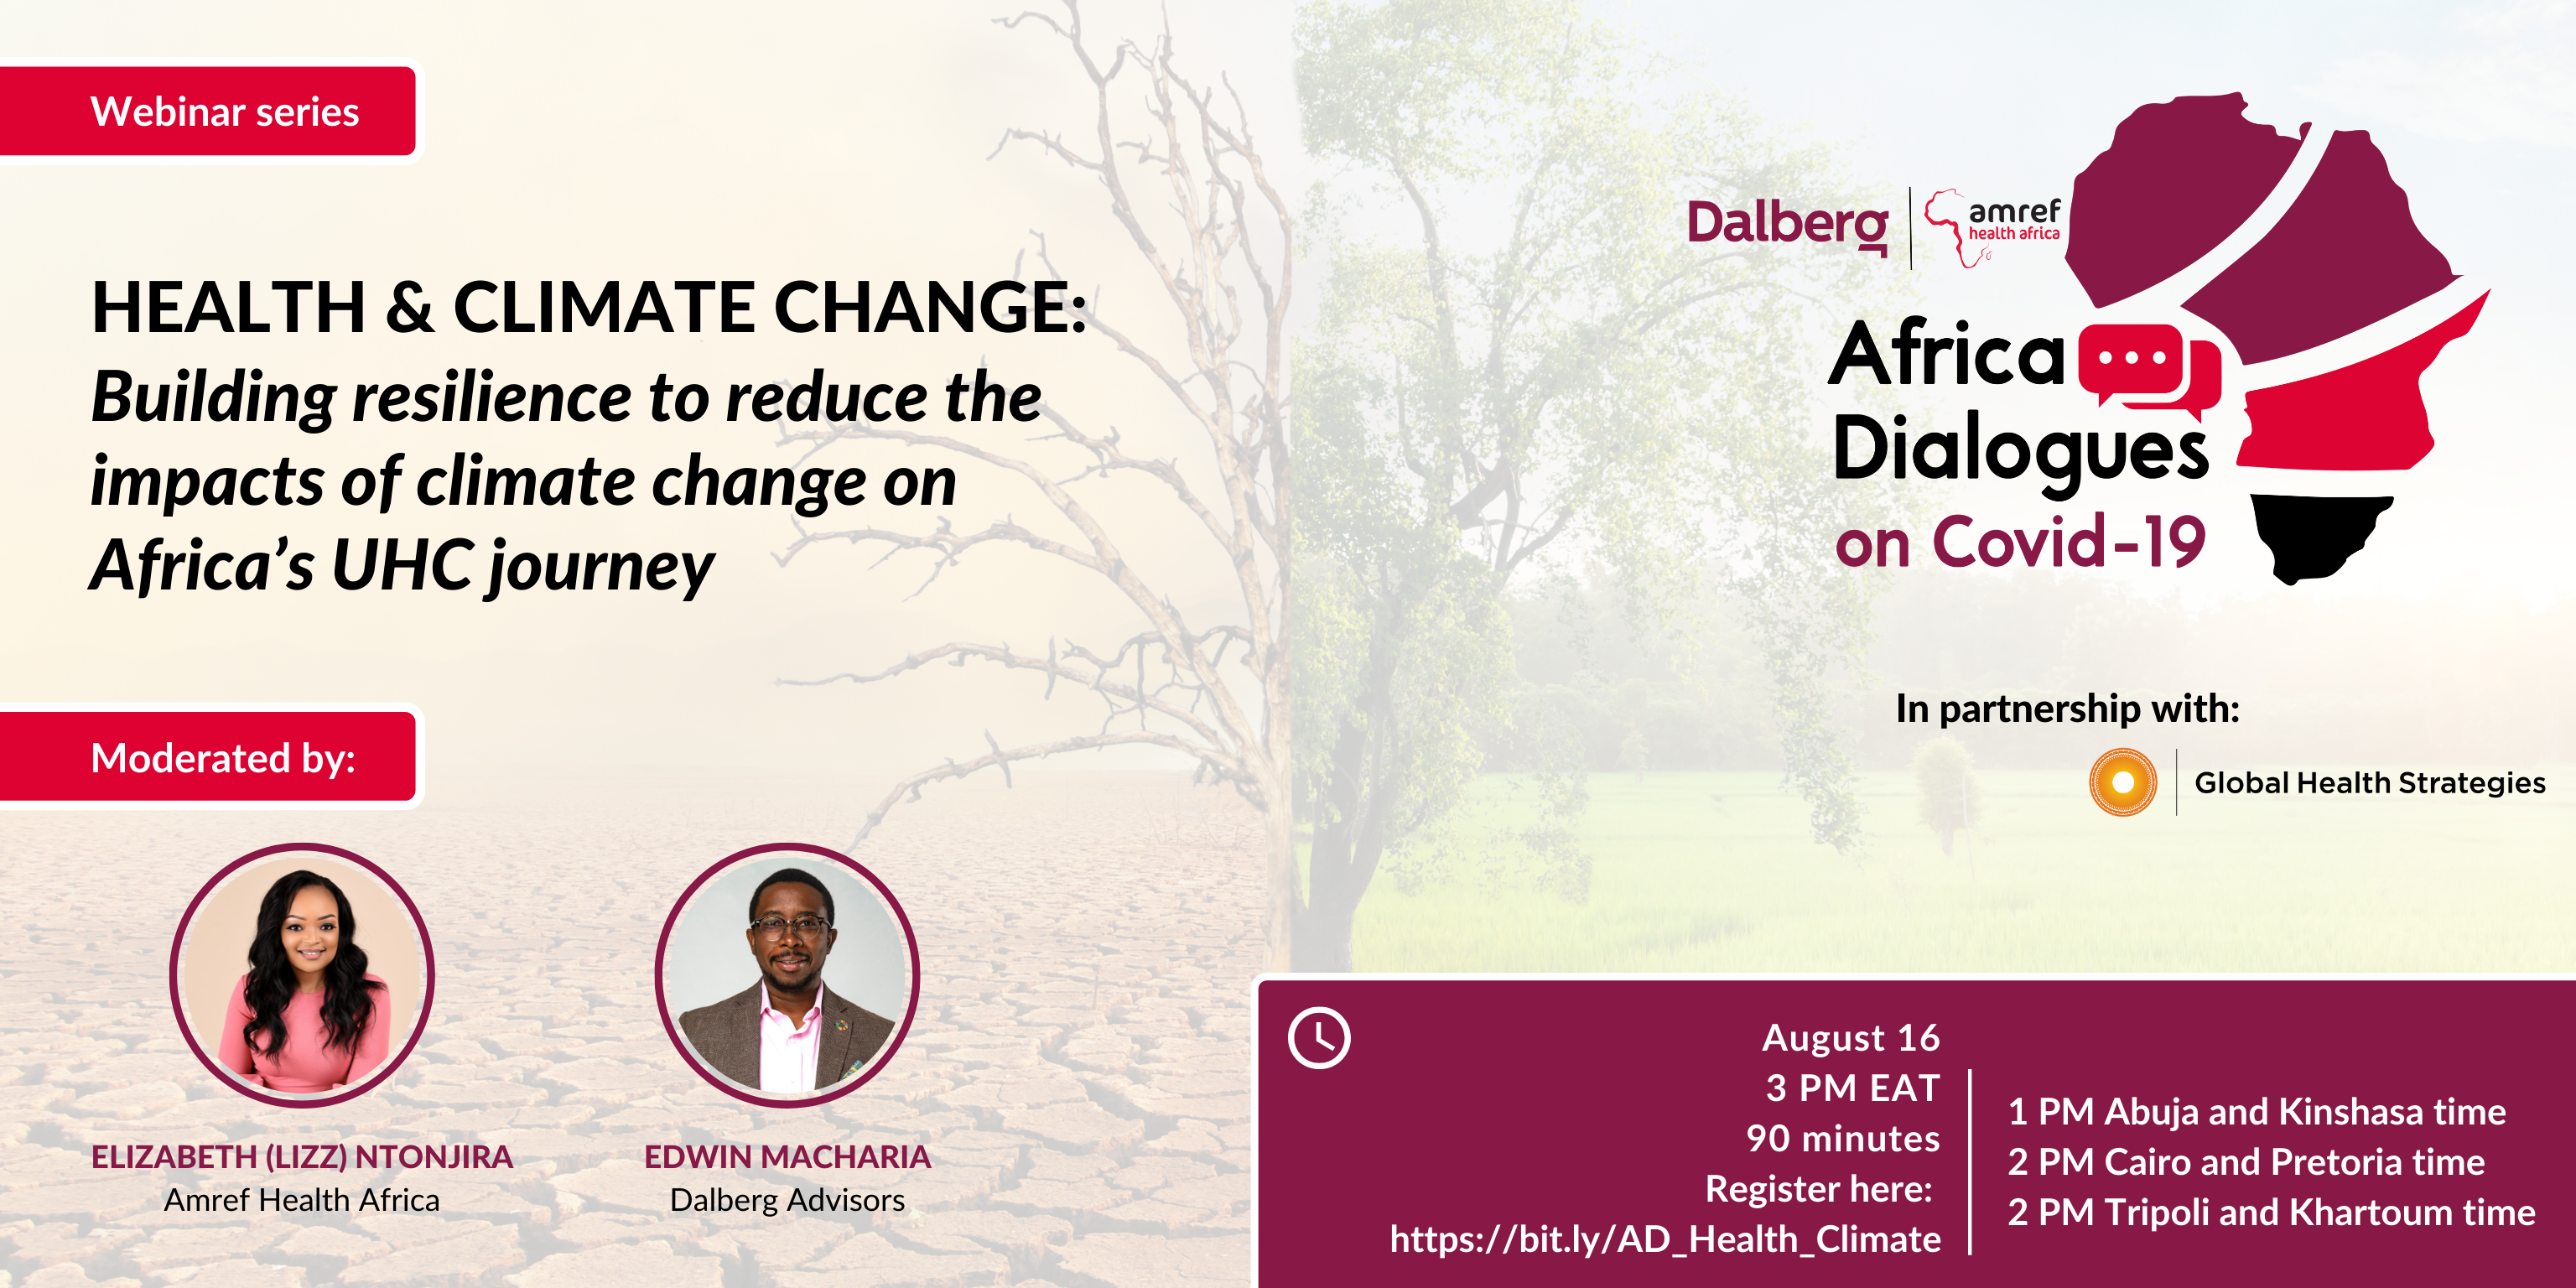 Health & Climate Change: Building Resilience to Reduce the Impacts of Climate Change on Africa’s UHC Journey